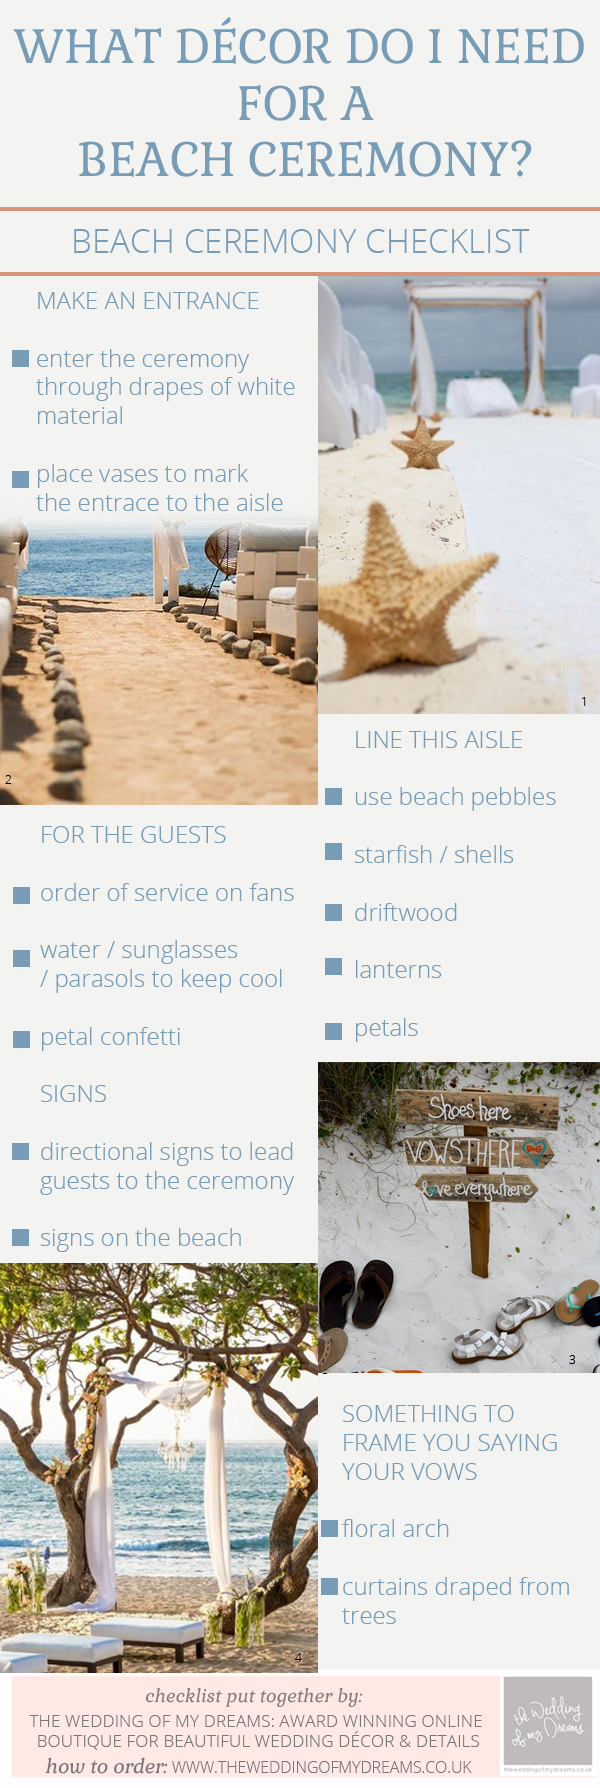 6-wedding-checklist-templates-for-rustic-beach-and-outdoor-weddings